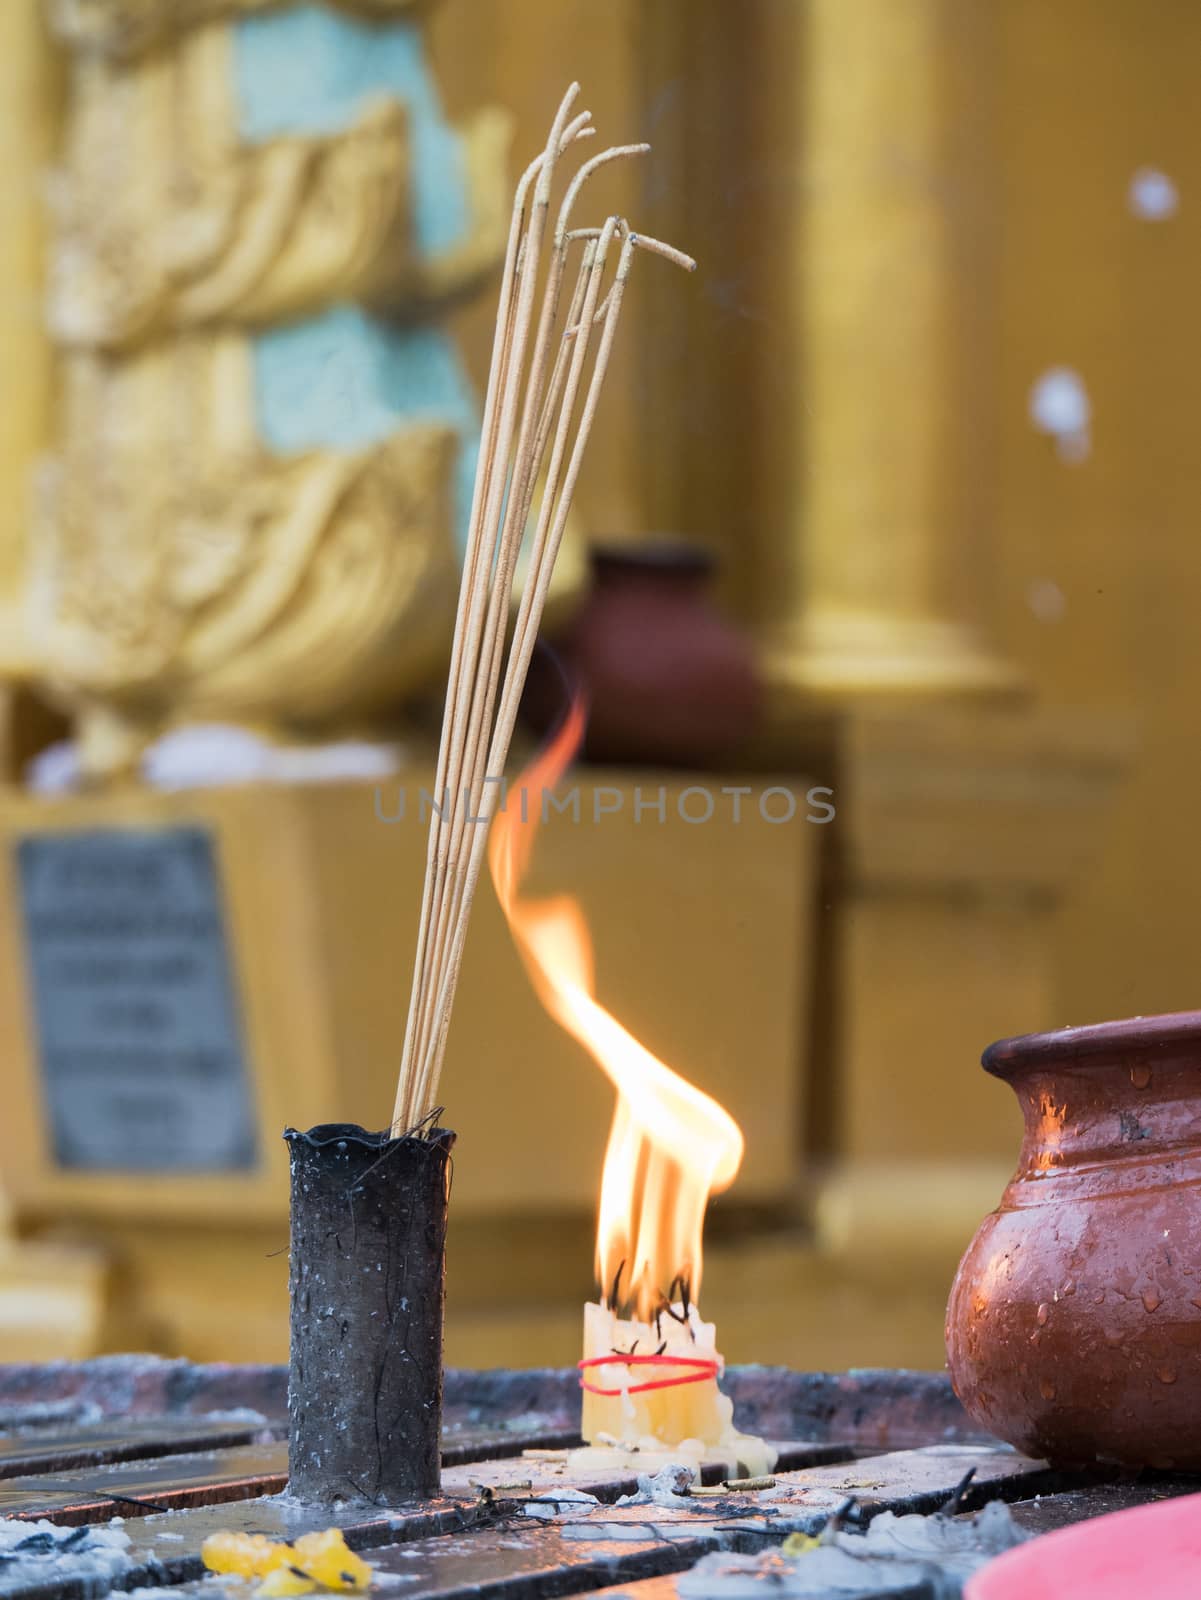 Joss sticks and candles at the Shwedagon Pagoda by epixx